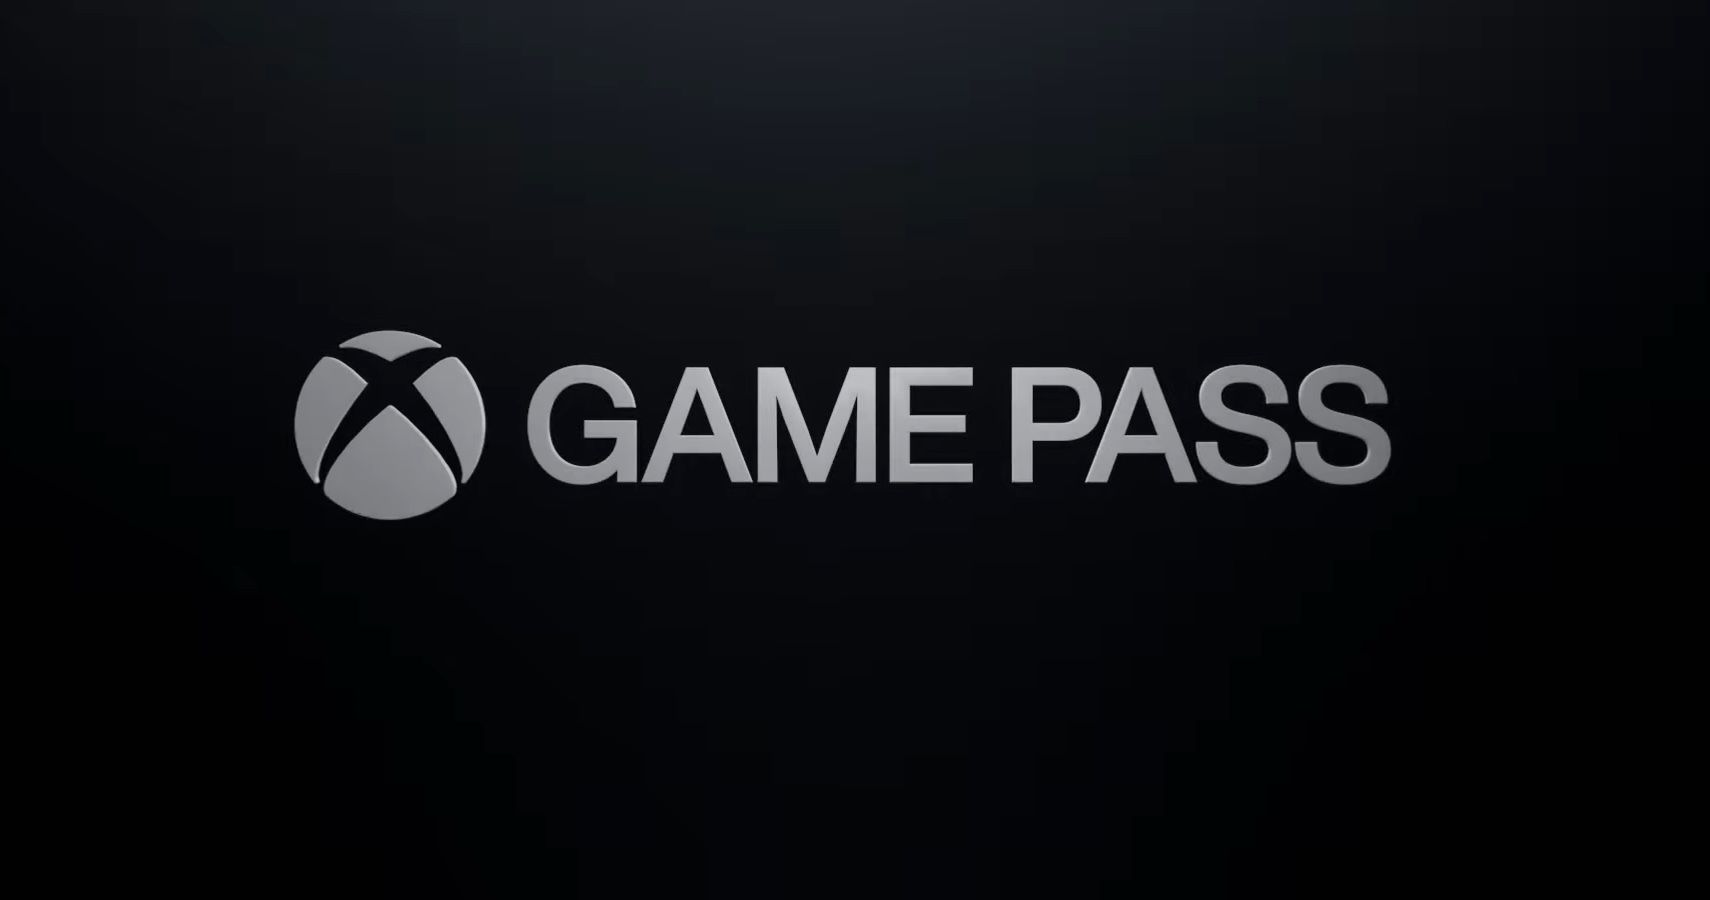 Xbox Is Teasing New Game Pass Titles On Twitter